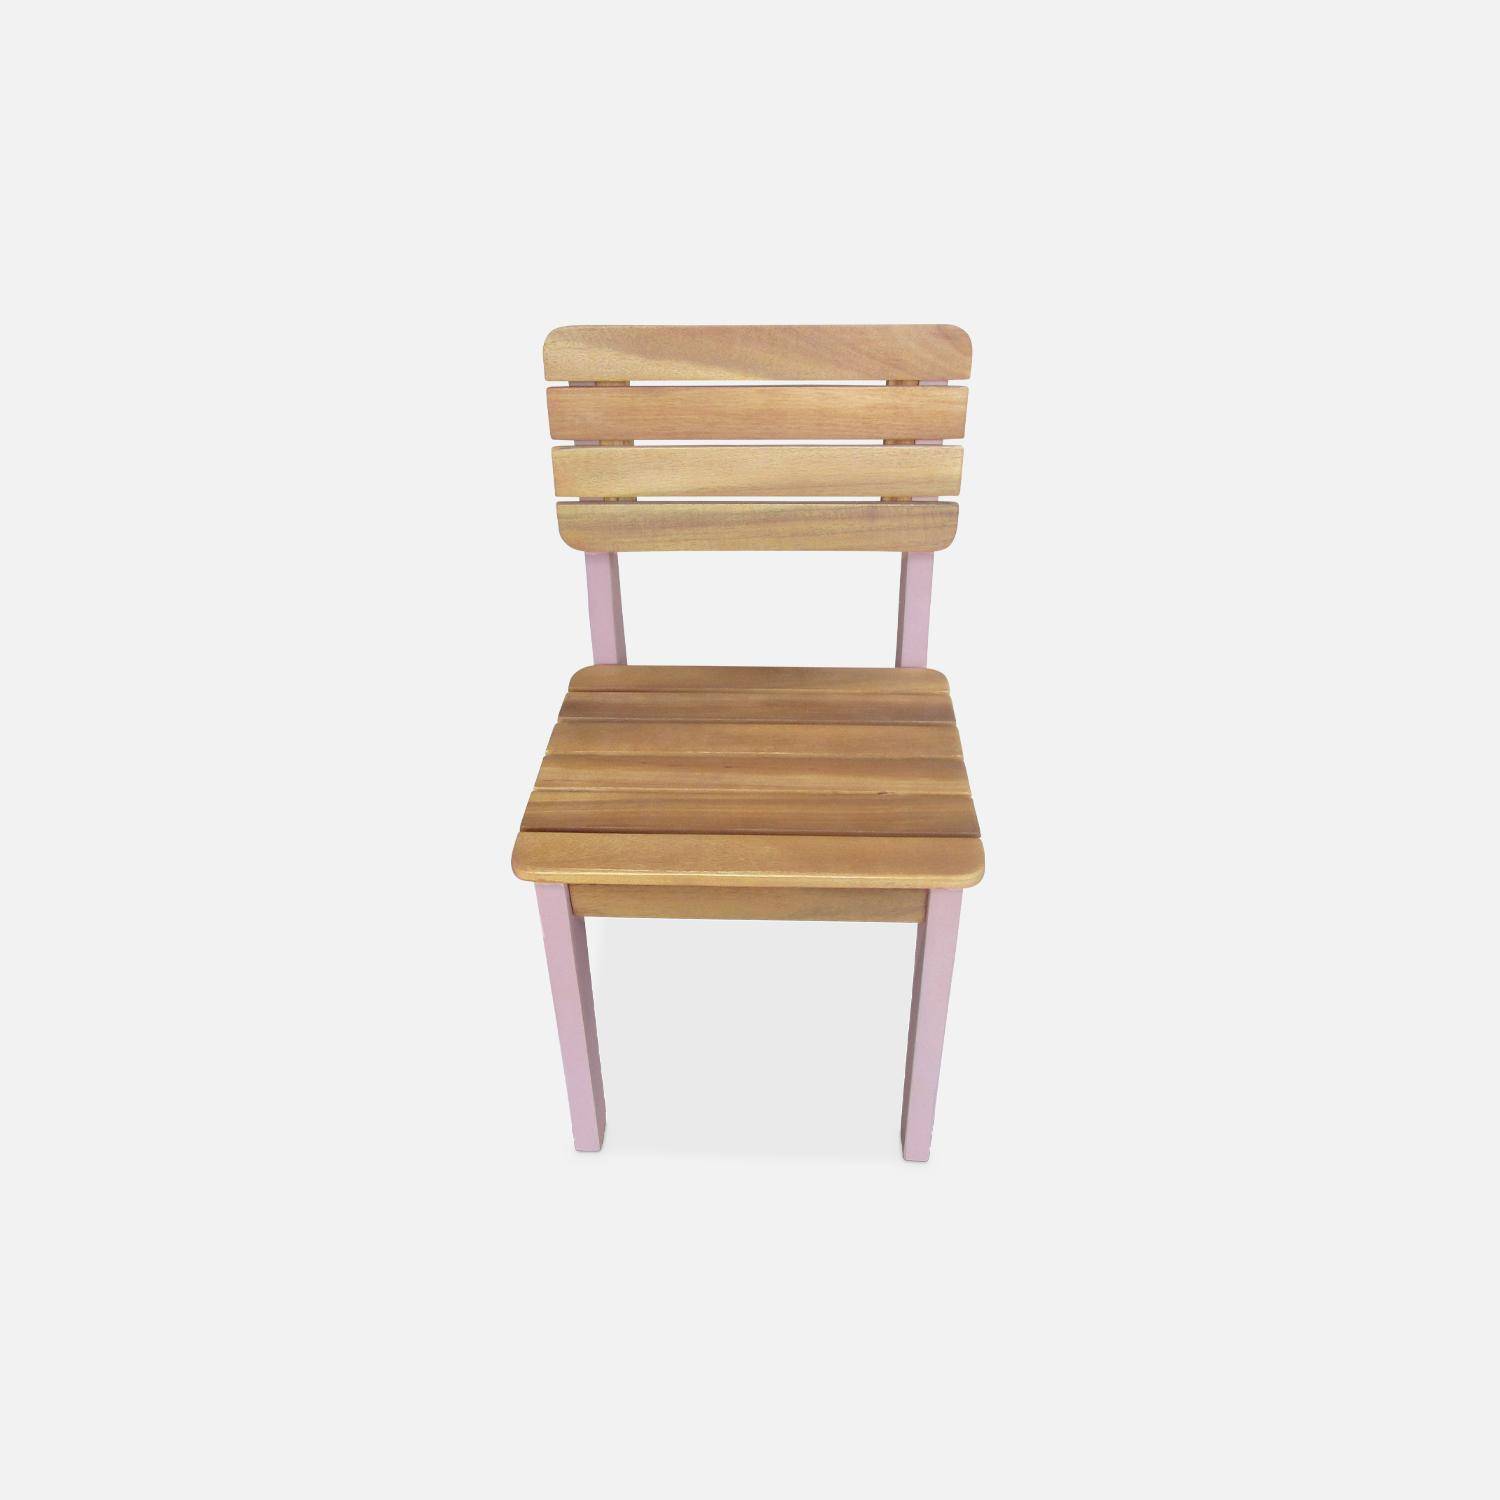 Solid Wood Chairs for Children, Indoor/Outdoor (Set of 2), pink, L29 x D31.5 x H53 cm,sweeek,Photo4